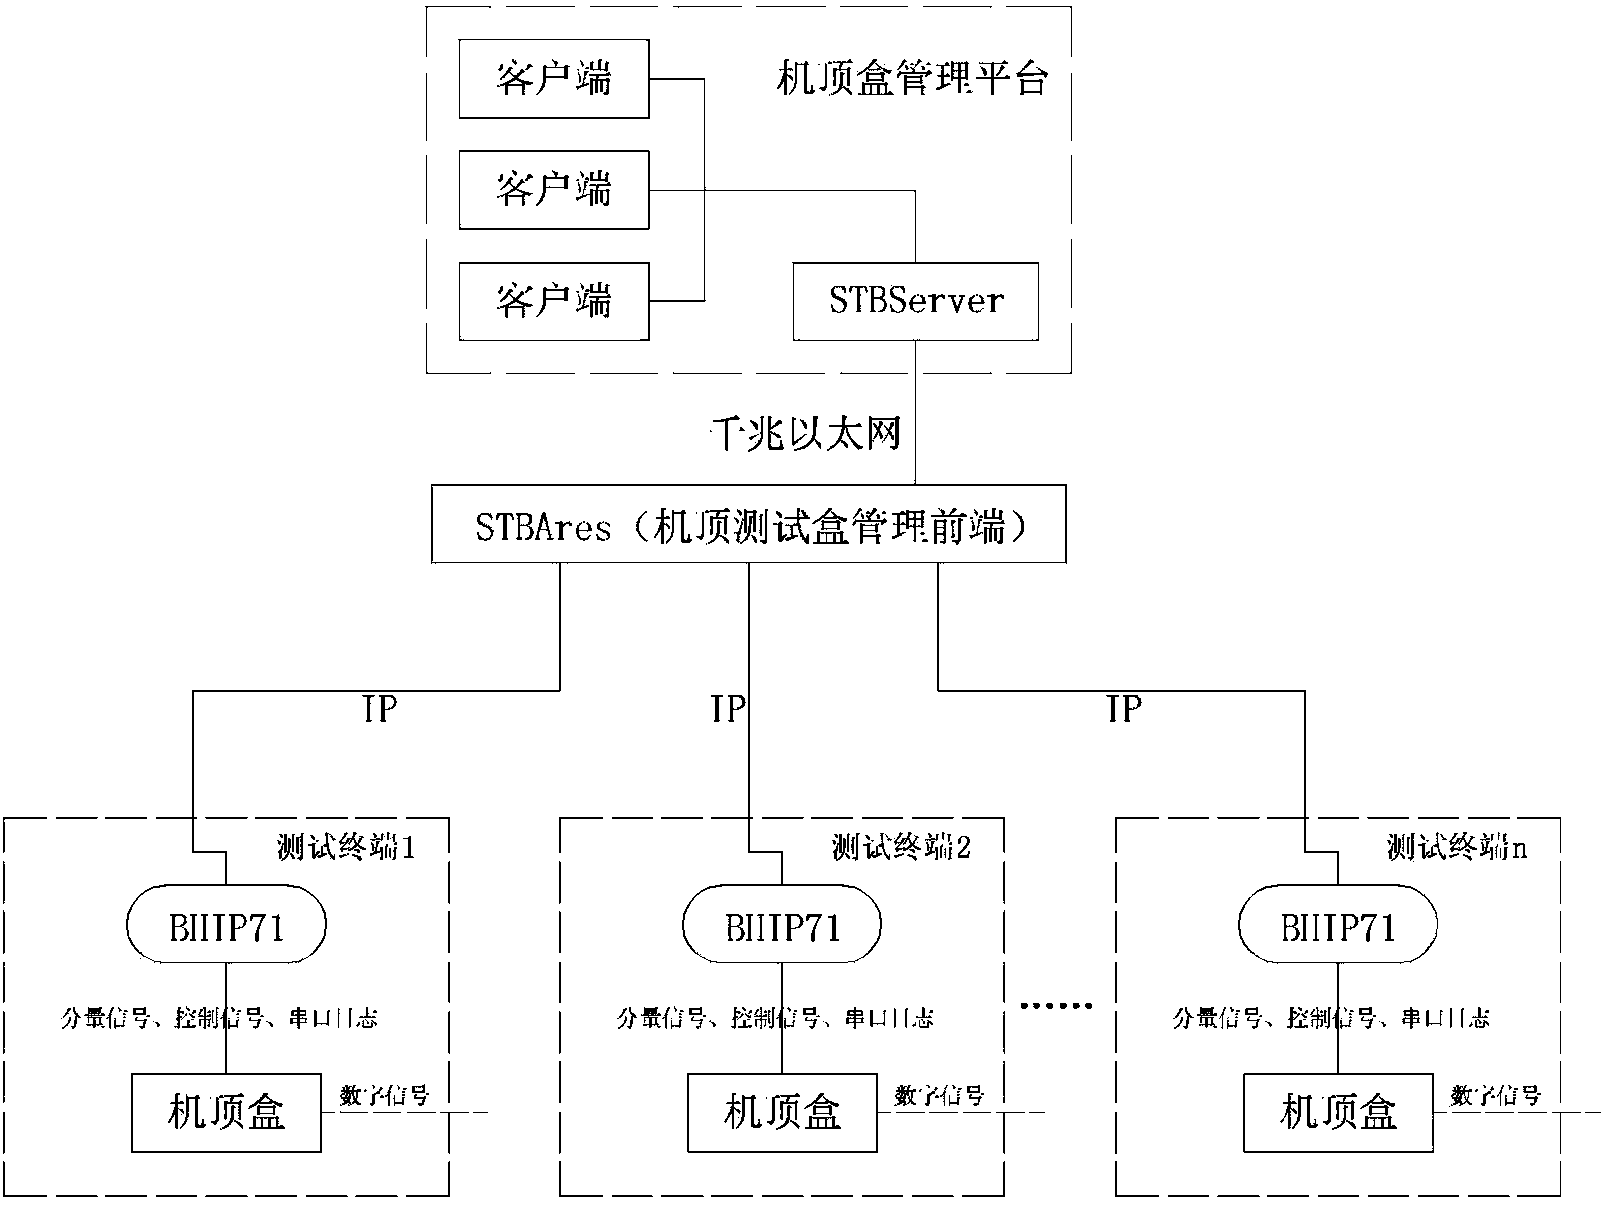 Method and system for comparing functional consistency of multiple set top boxes